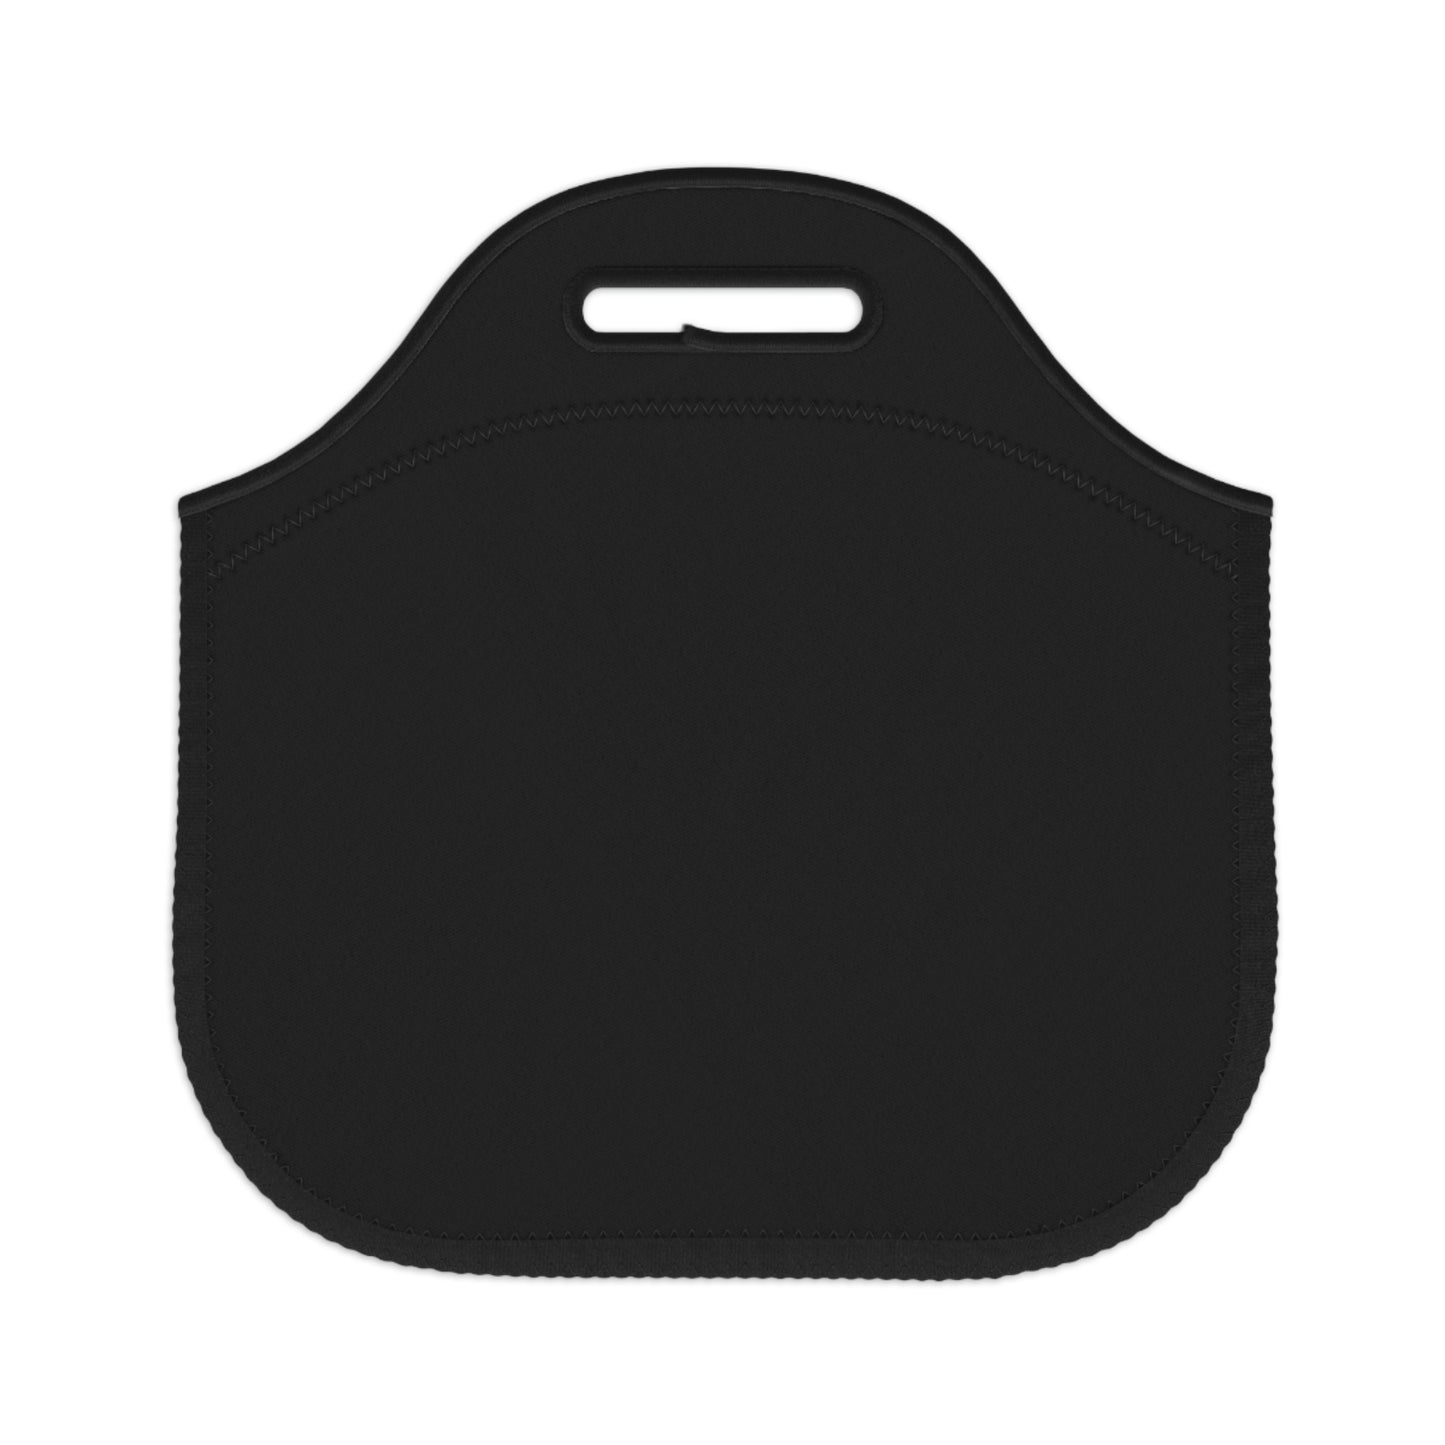 The Bible as Simple as ABC B Neoprene Lunch Bag